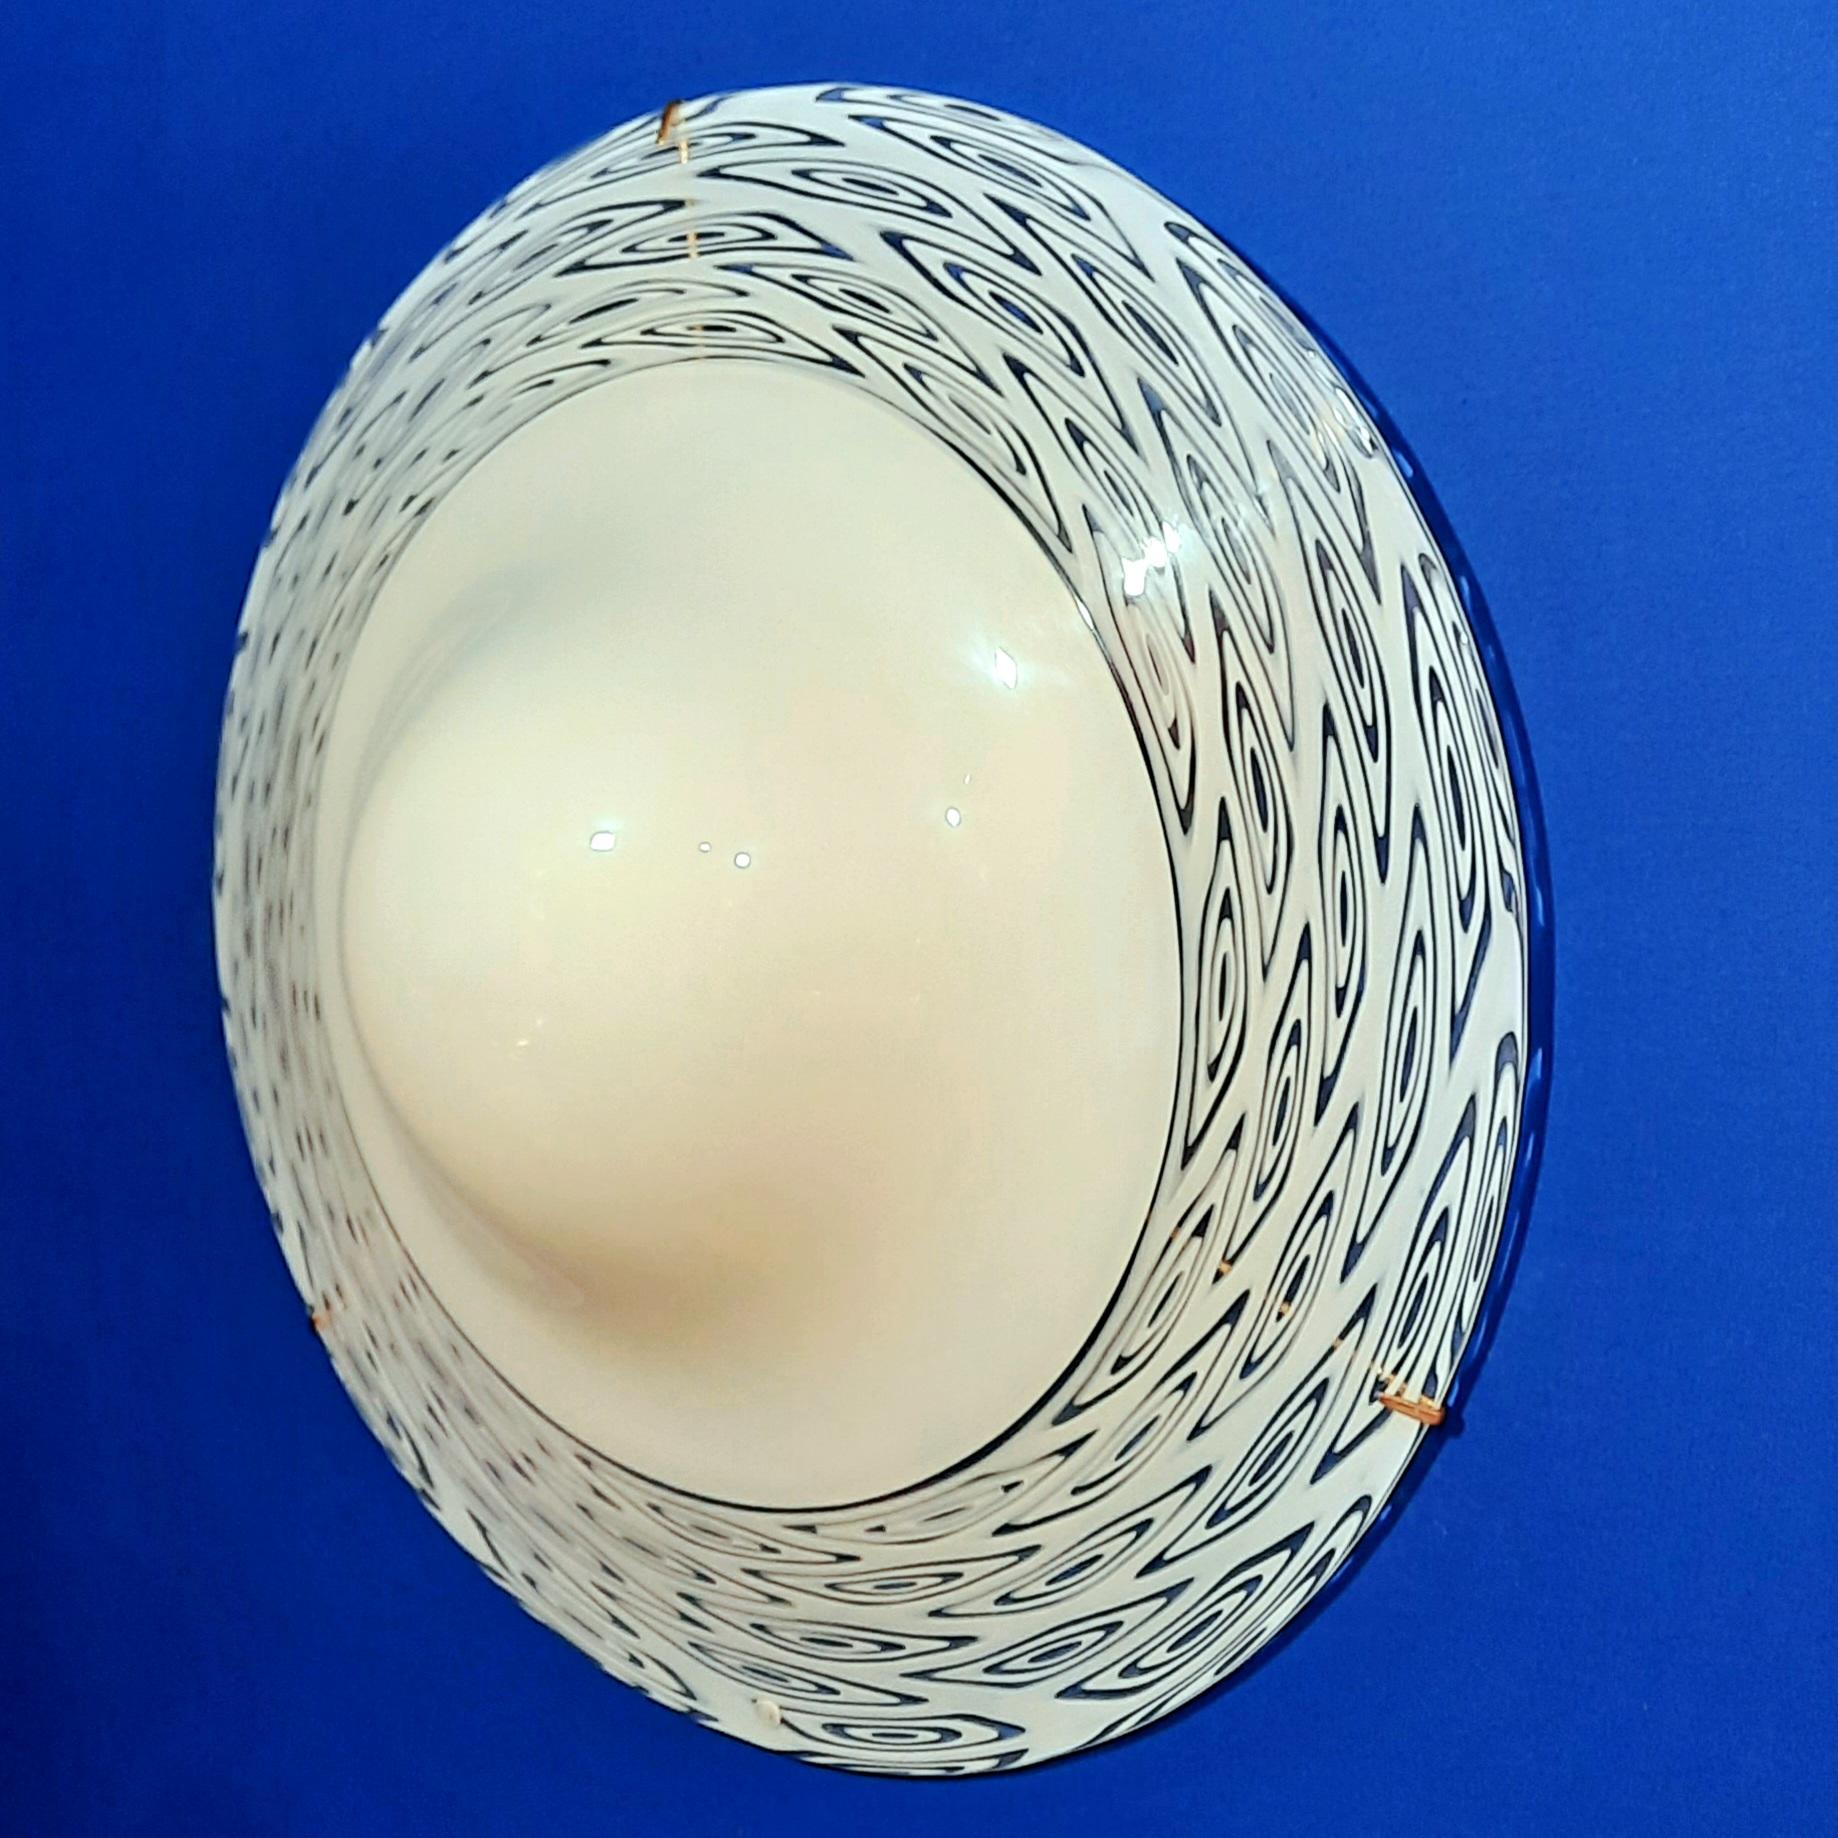 Large round dome curved in its center manufactured by 